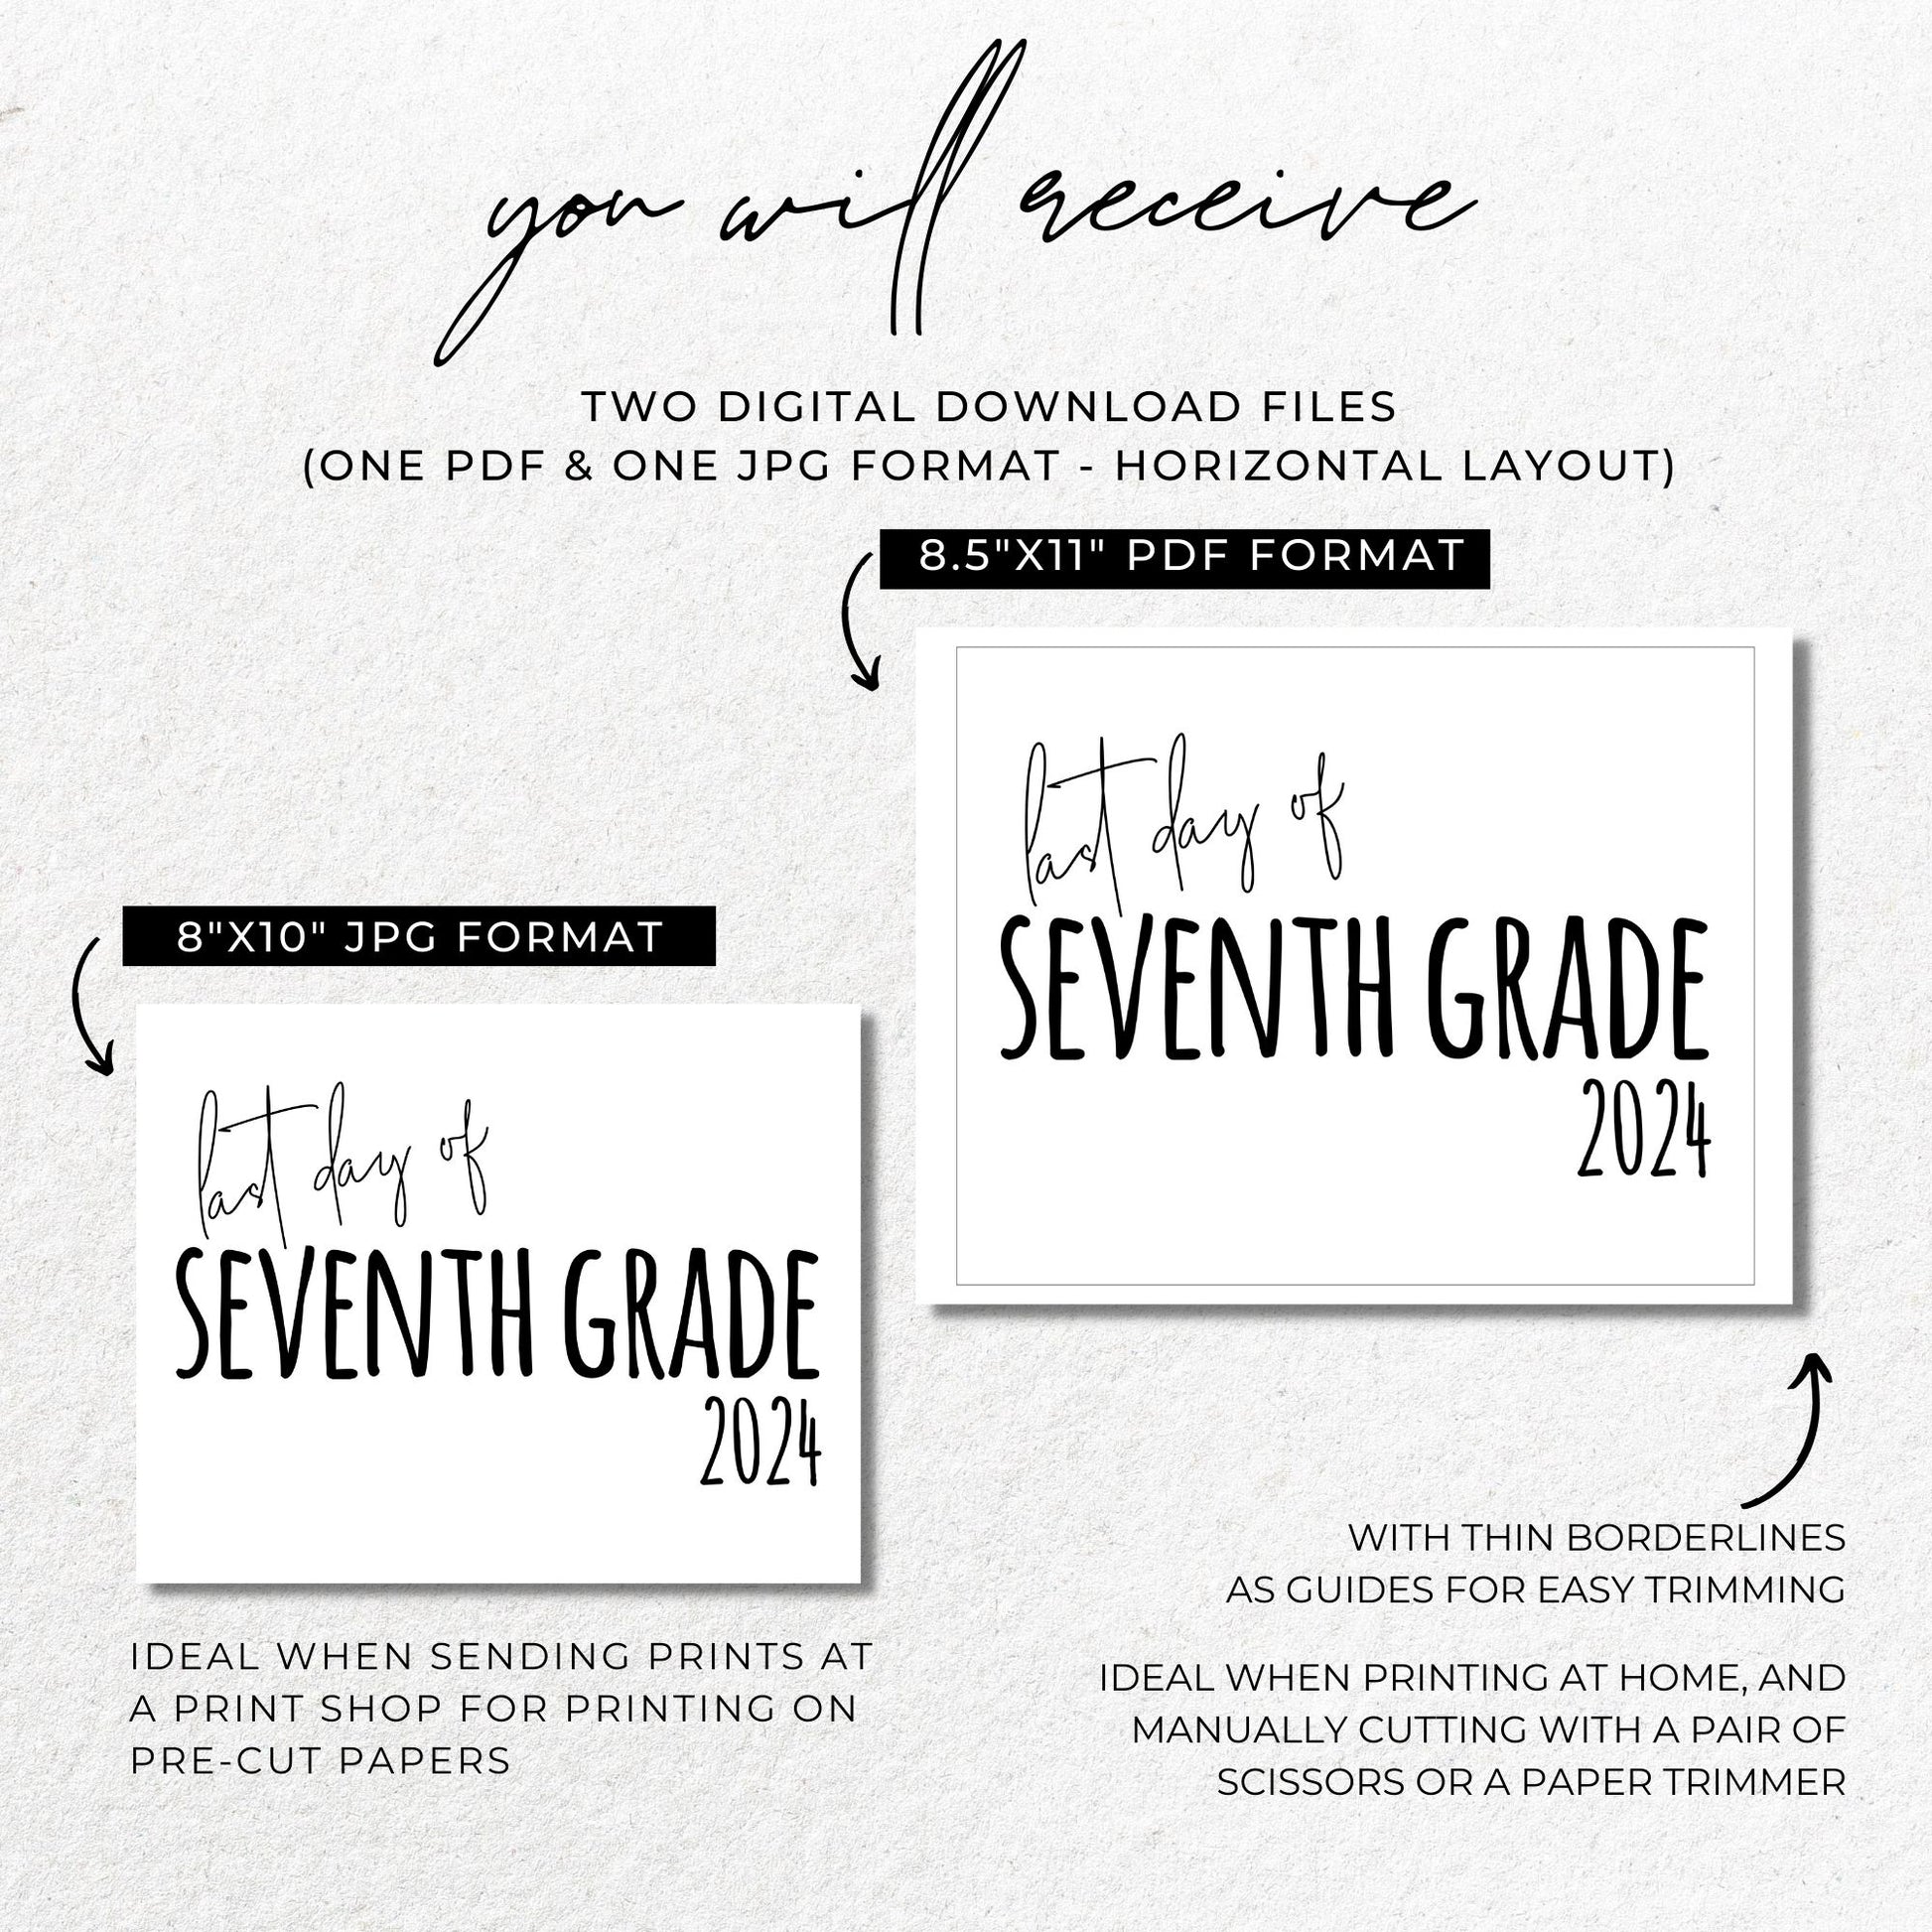 Last Day of Seventh Grade 2024 Sign - Printable